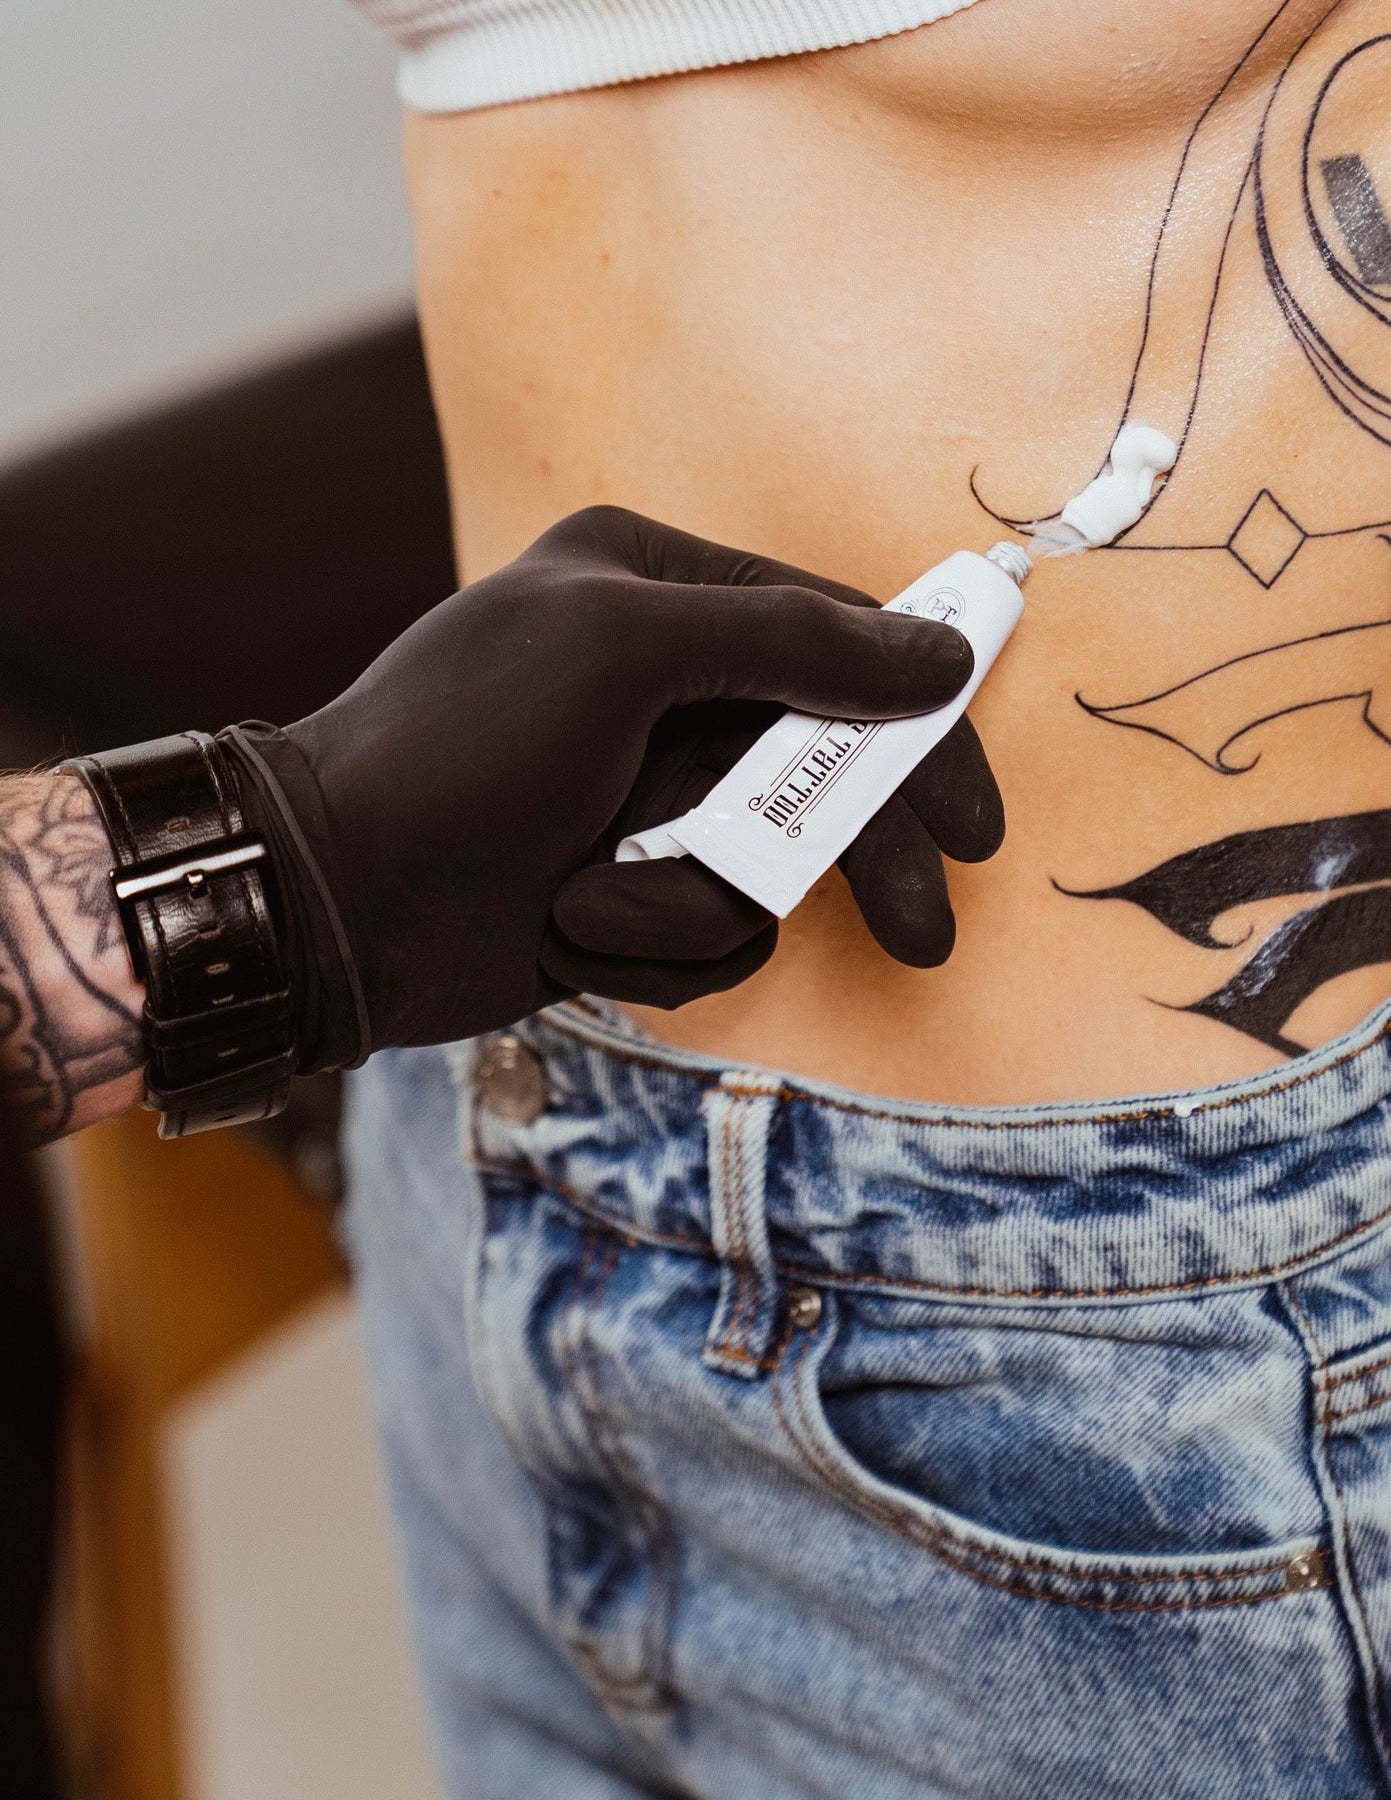 5 Best Tattoo Numbing Creams Experience Tattoos PainFree Guide  Best  Brands  Saved Tattoo